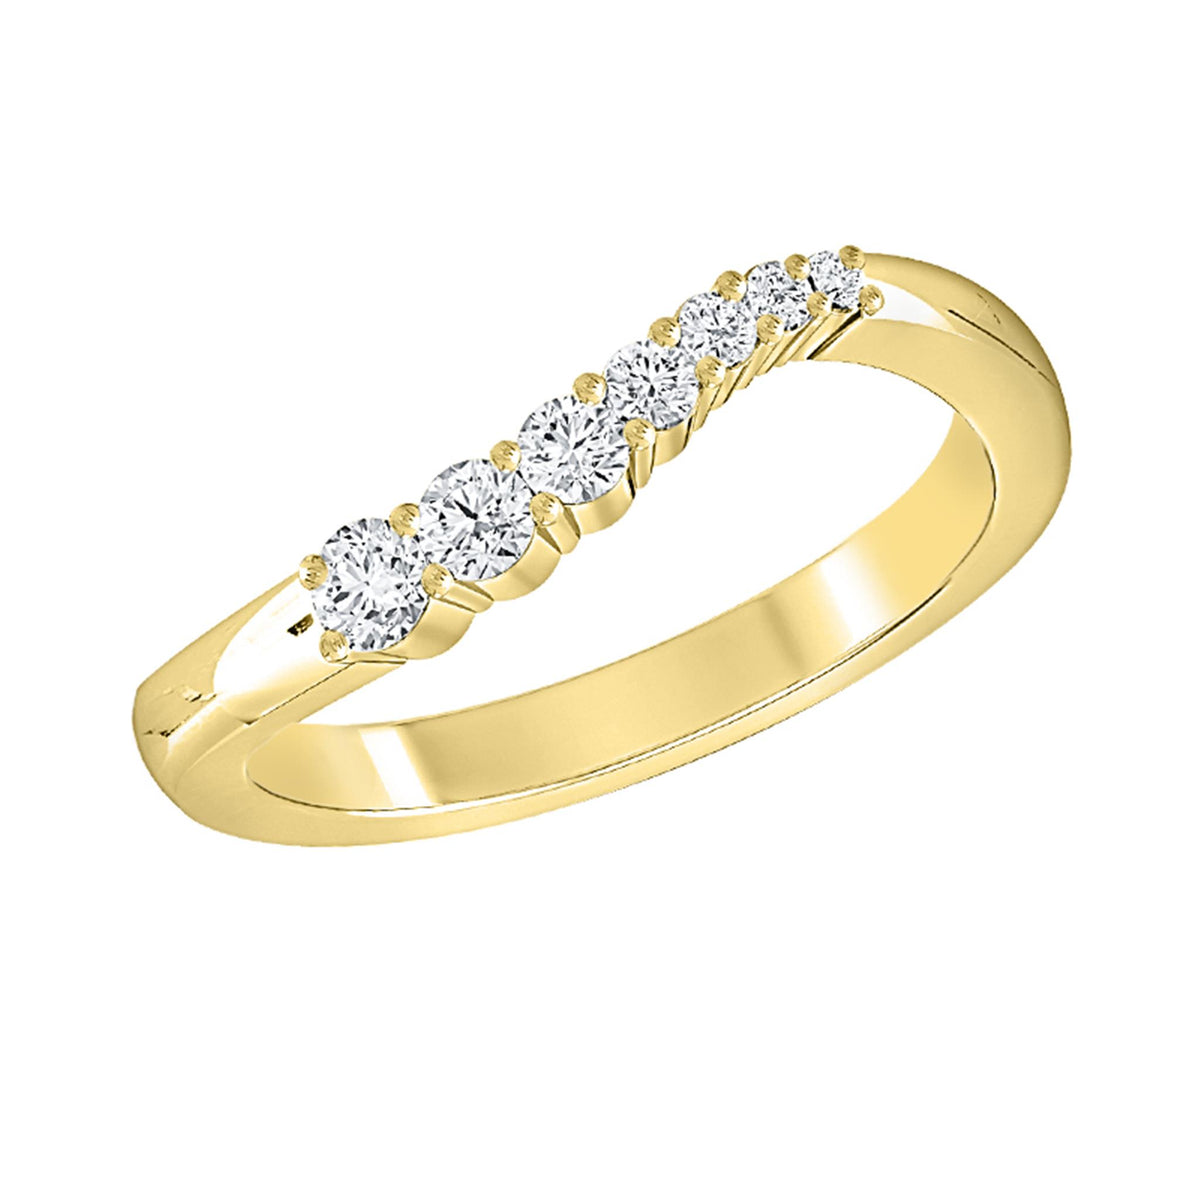 14Kt Yellow Gold Journey Wedding Ring With 0.25cttw Natural Diamonds